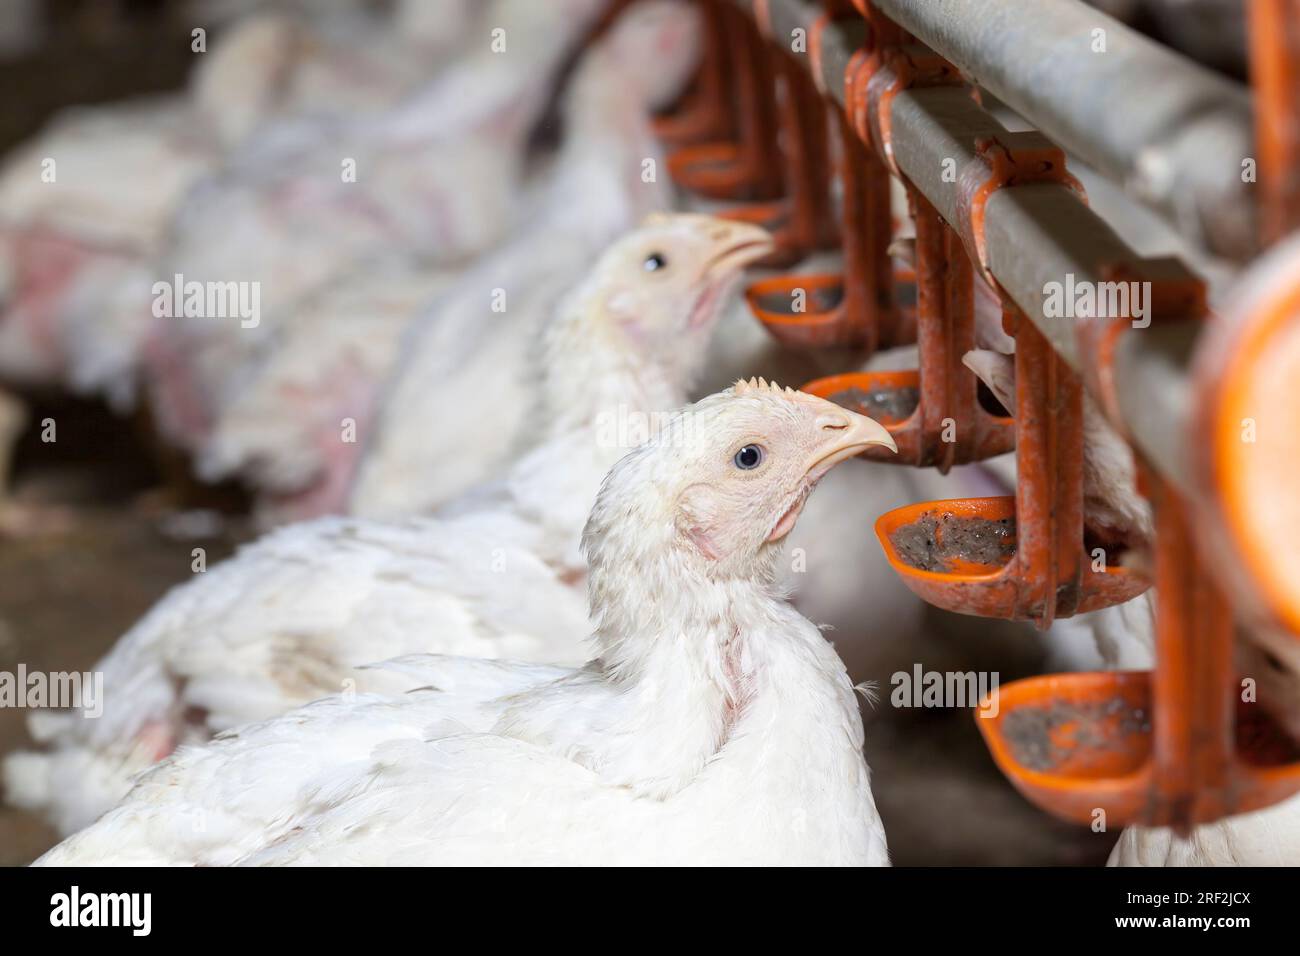 chicks of white broiler chicken at a poultry farm, raised to generate revenue from the sale of quality poultry meat chicken, genetically improved broi Stock Photo